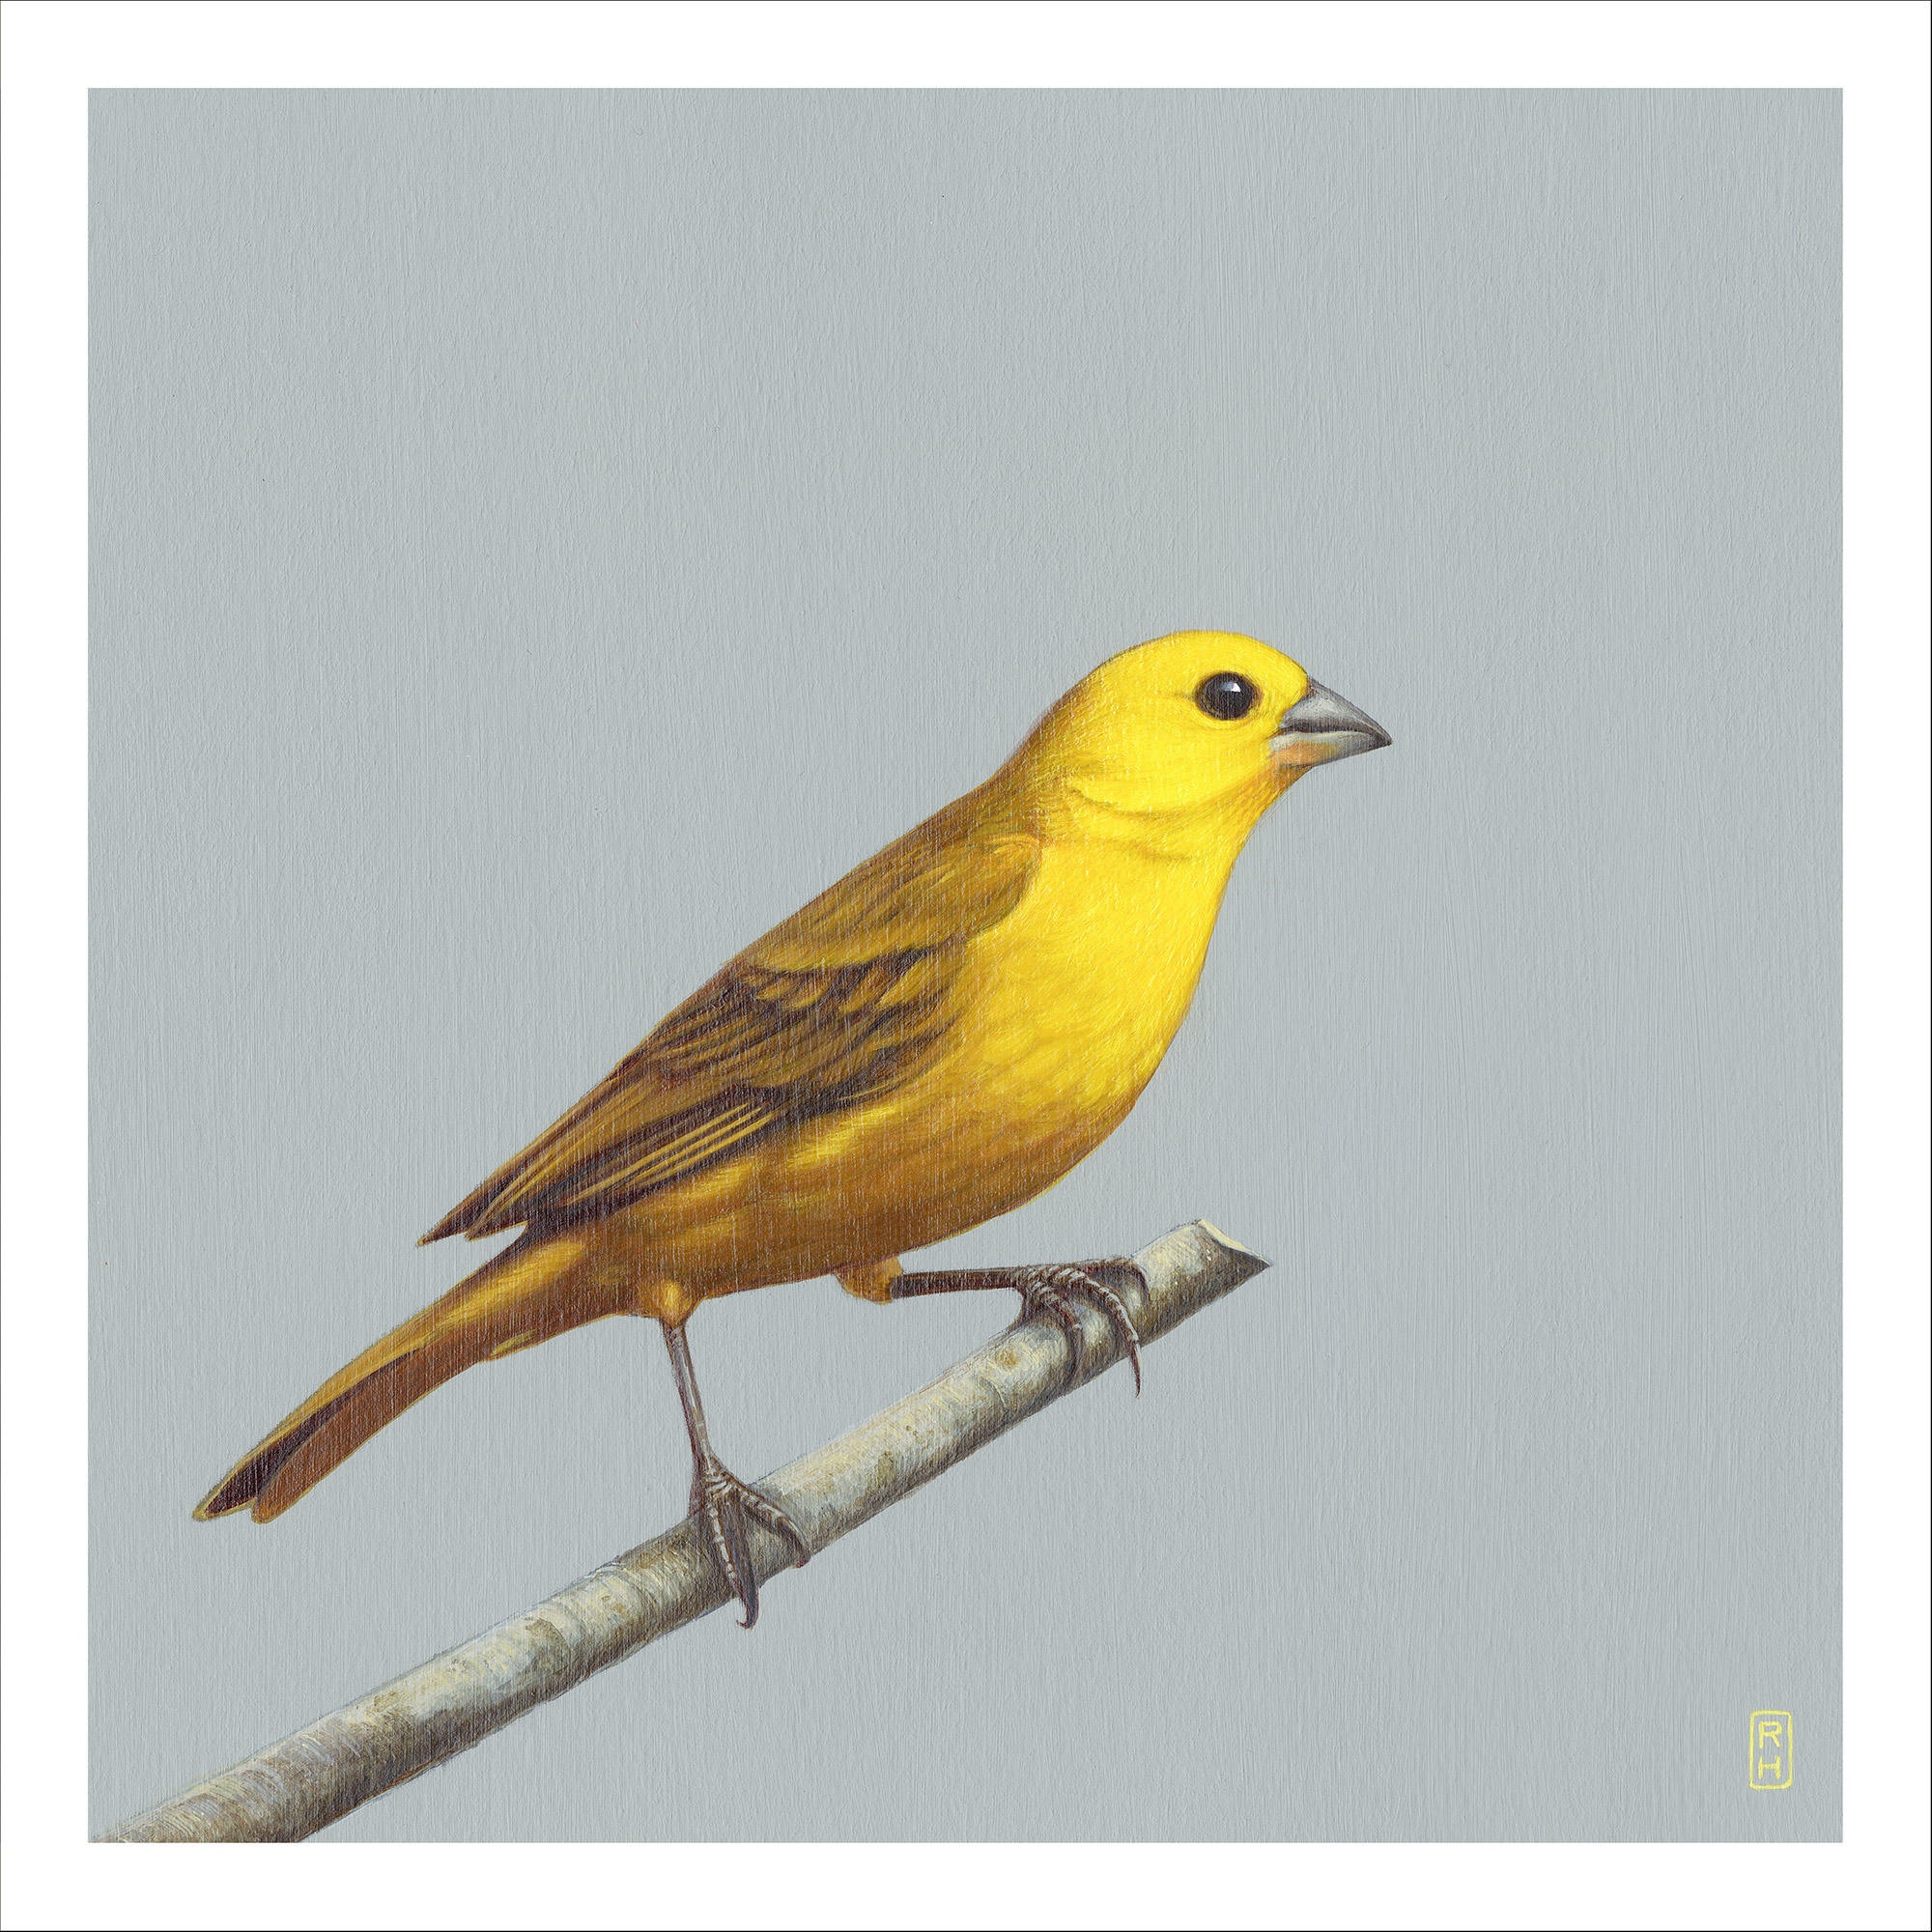 Painting of a canary